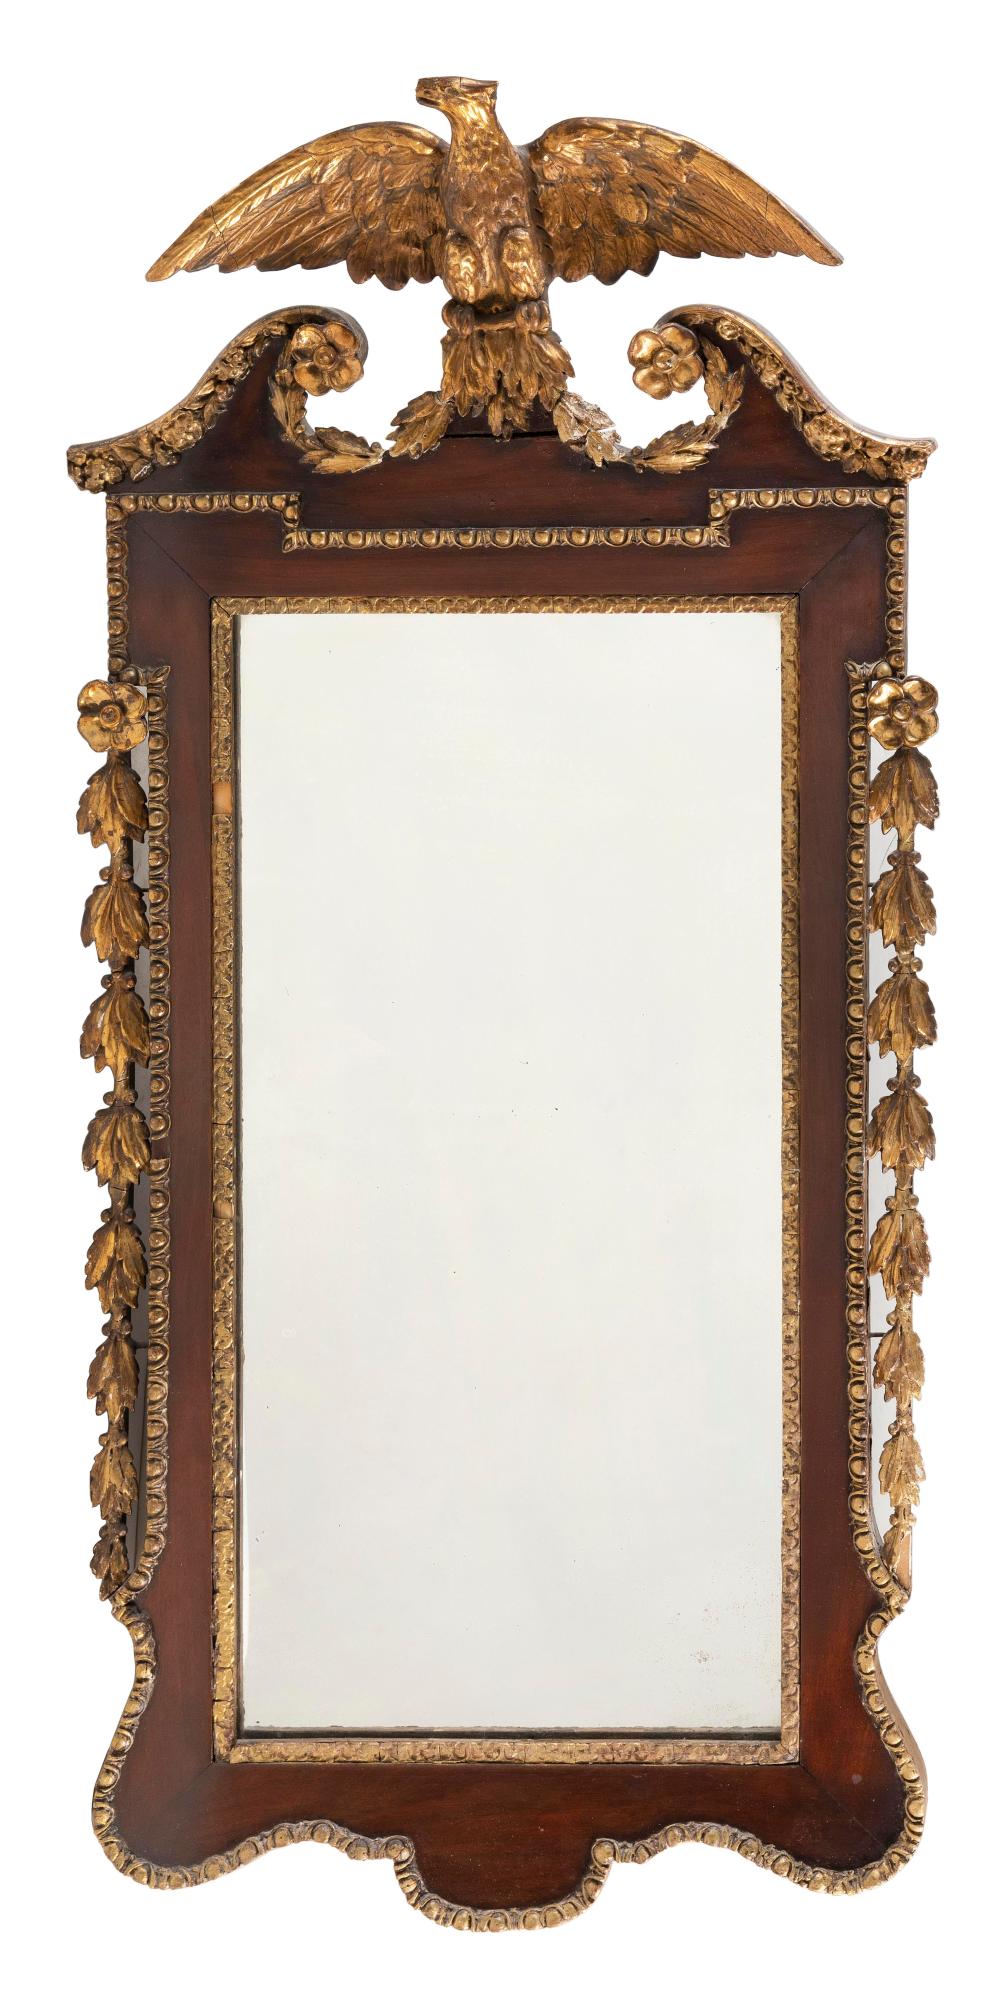 FEDERAL STYLE MIRROR IN MAHOGANY 34be66